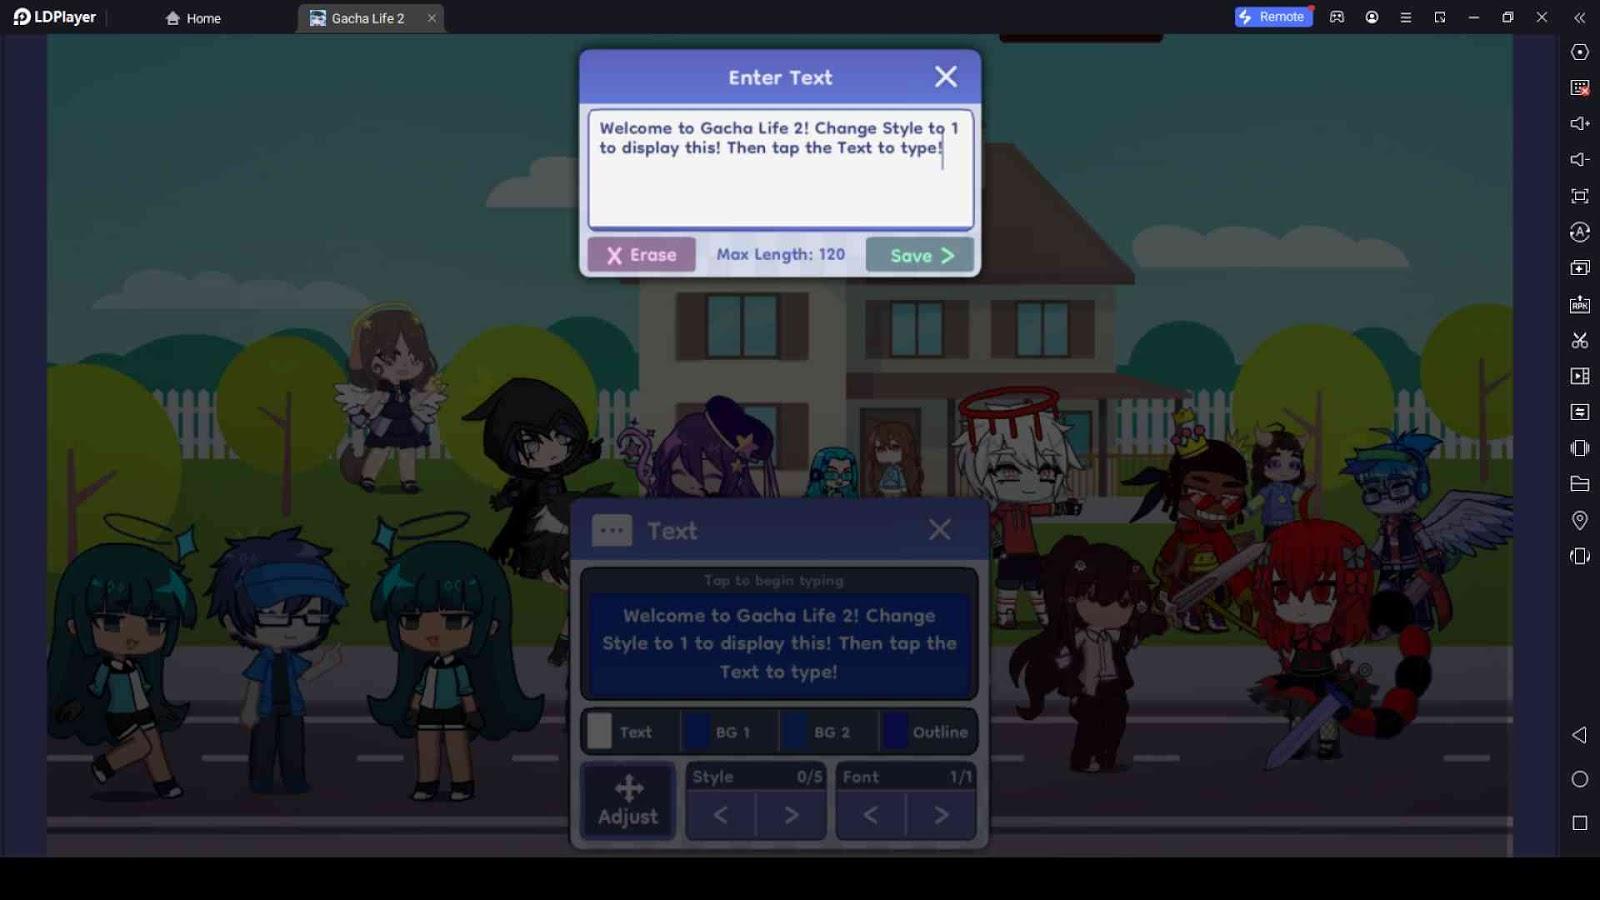 How to make animation in Gacha Life 2